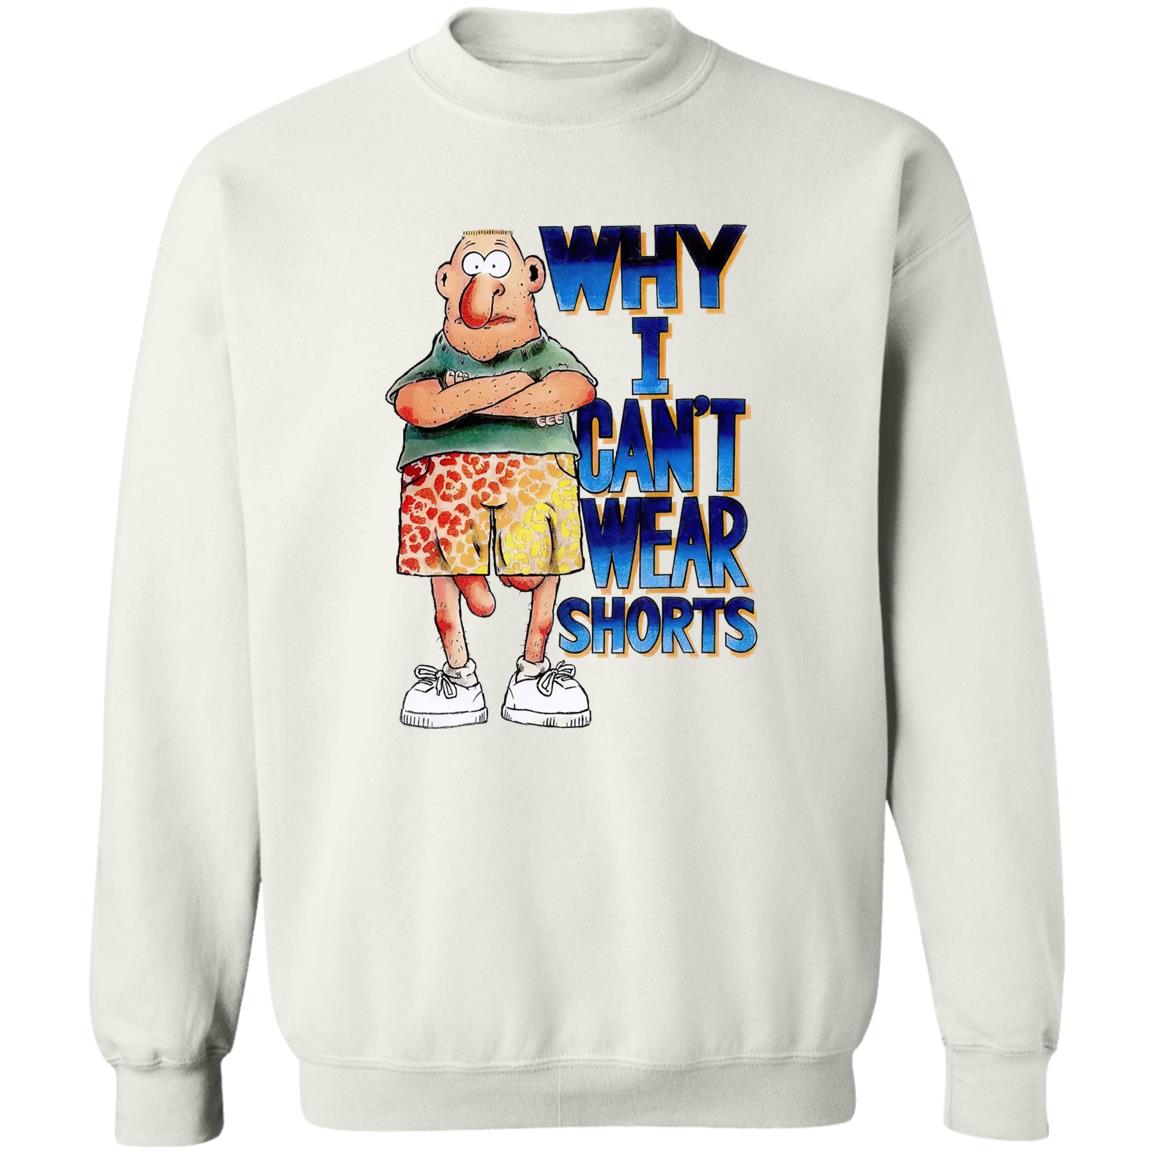 Why I Can’t Wear Shorts Shirt 2